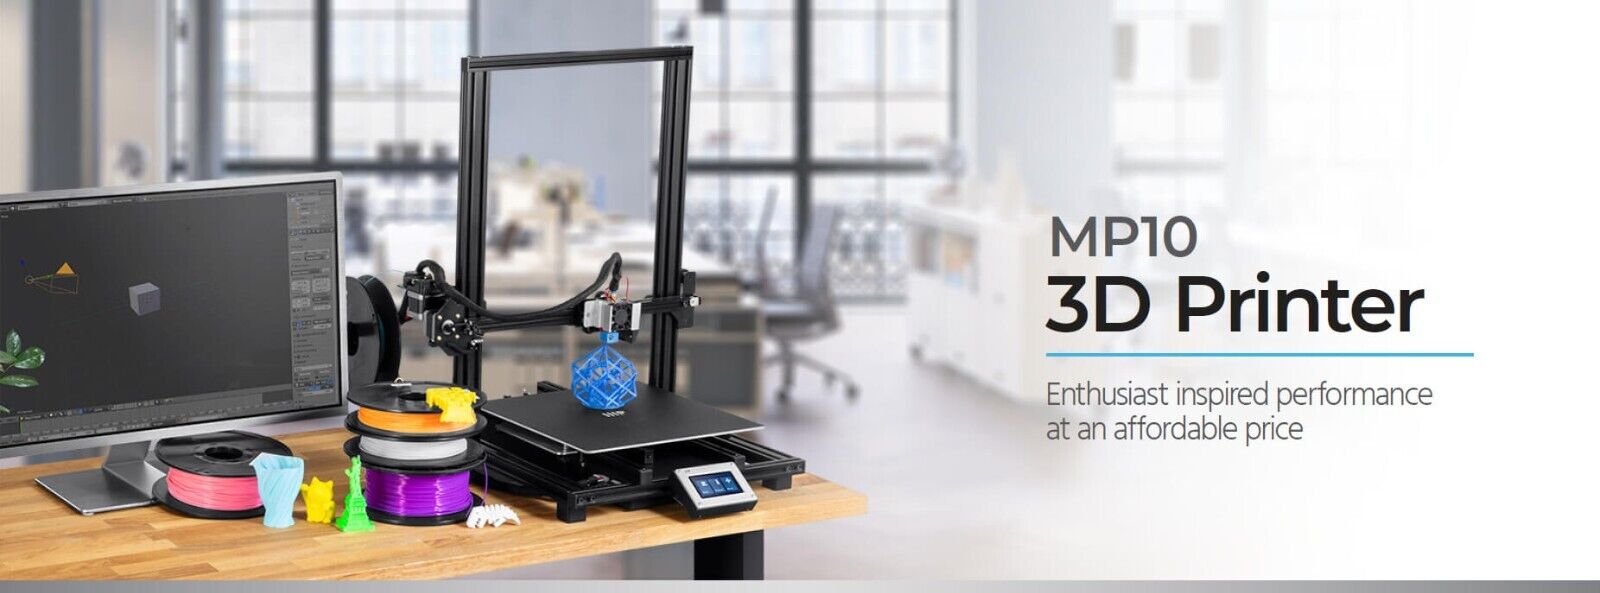 Monoprice MP10 300x300mm 3D Printer, Magnetic Heated Build Plate, Resume Print F